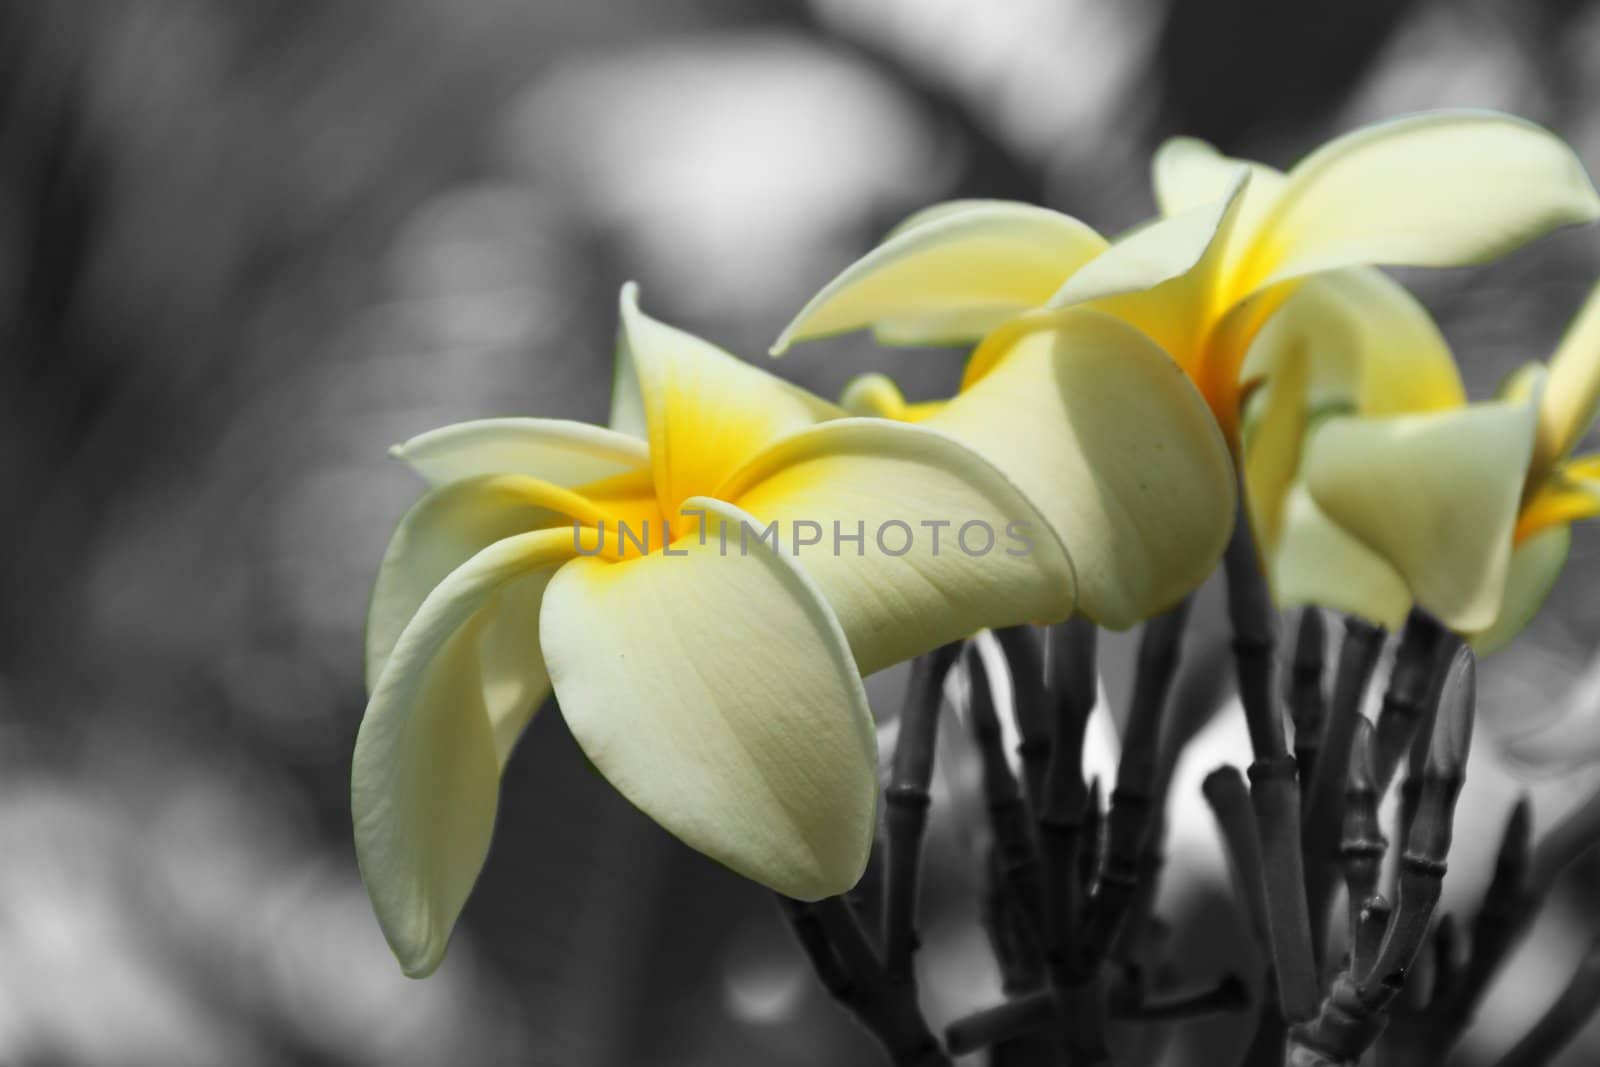 Selective Color Flowers by jasony00